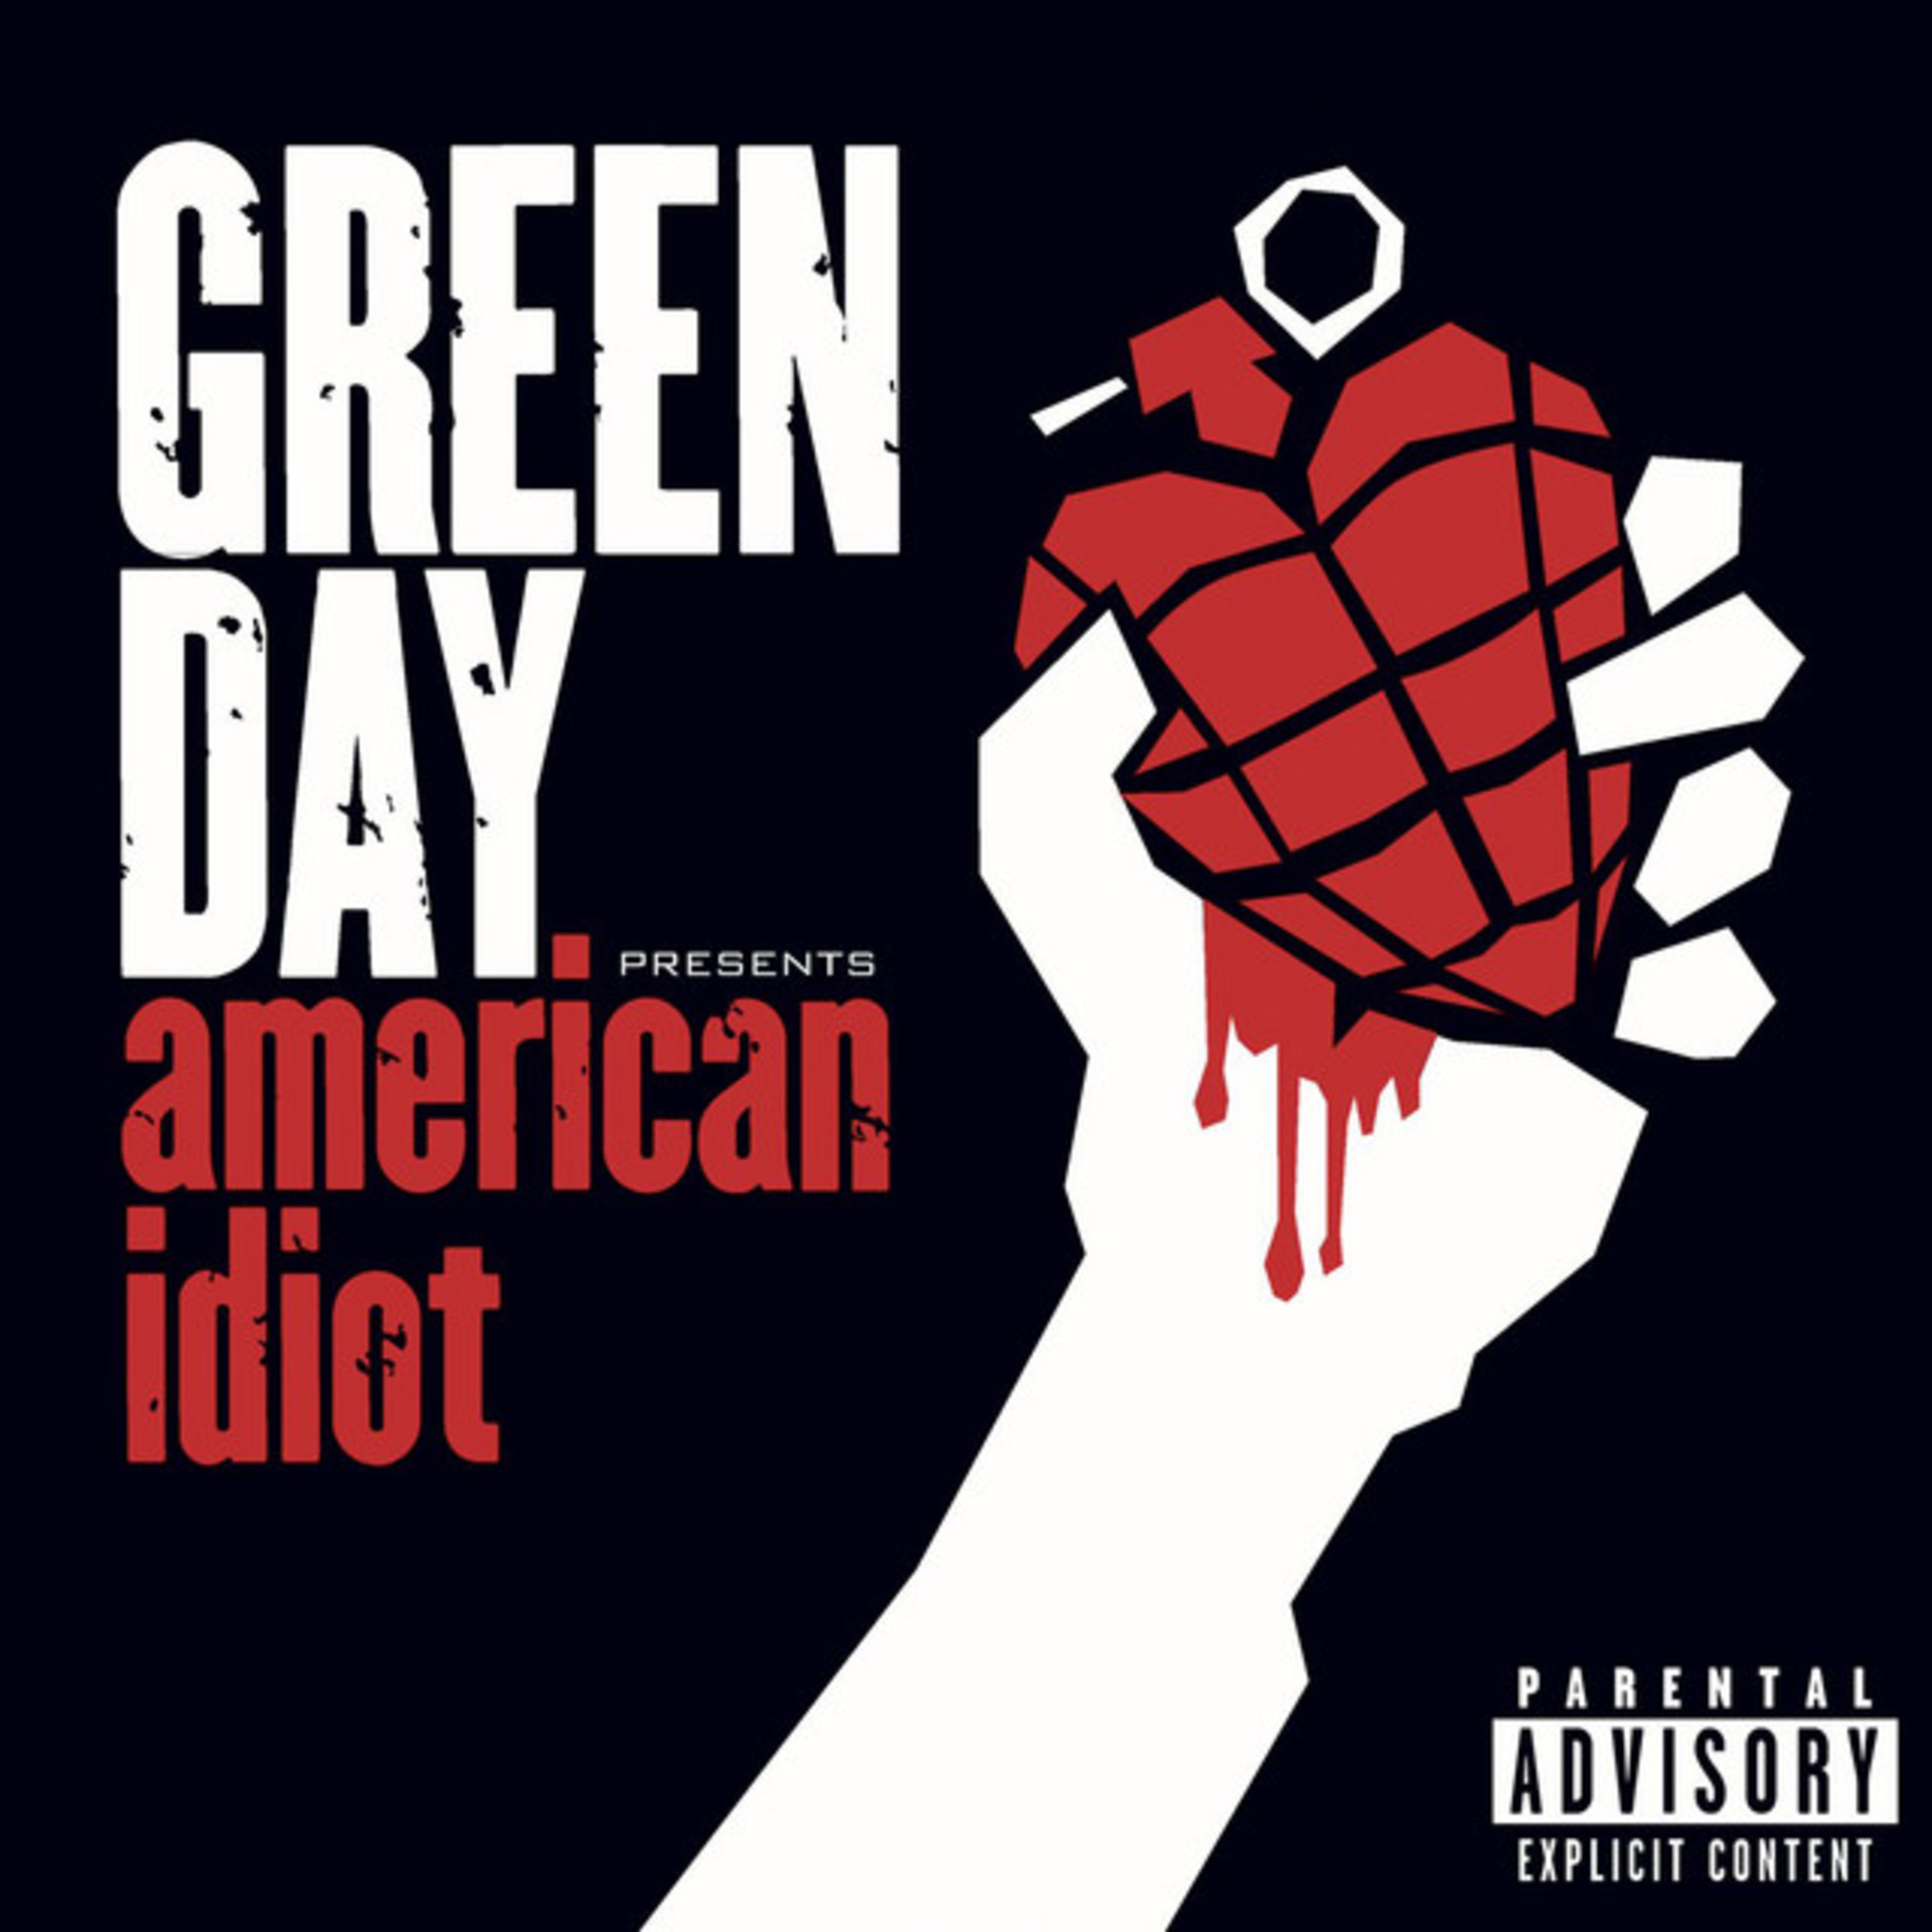 <p>After going through a slight slump in their career, Green Day was ready to make a comeback with their seventh album, <em>American Idiot.</em> Their alternative and punk rock sound was evident on tracks like "Boulevard of Broken Dreams," <a href="https://www.youtube.com/watch?v=NU9JoFKlaZ0">"Wake Me Up When September Ends," </a>and the eponymous single. Not only did the album become the band's best-selling first-week project, but they also won a Grammy Award for Best Rock Album. </p><p><a href='https://www.msn.com/en-us/community/channel/vid-cj9pqbr0vn9in2b6ddcd8sfgpfq6x6utp44fssrv6mc2gtybw0us'>Follow us on MSN to see more of our exclusive entertainment content.</a></p>